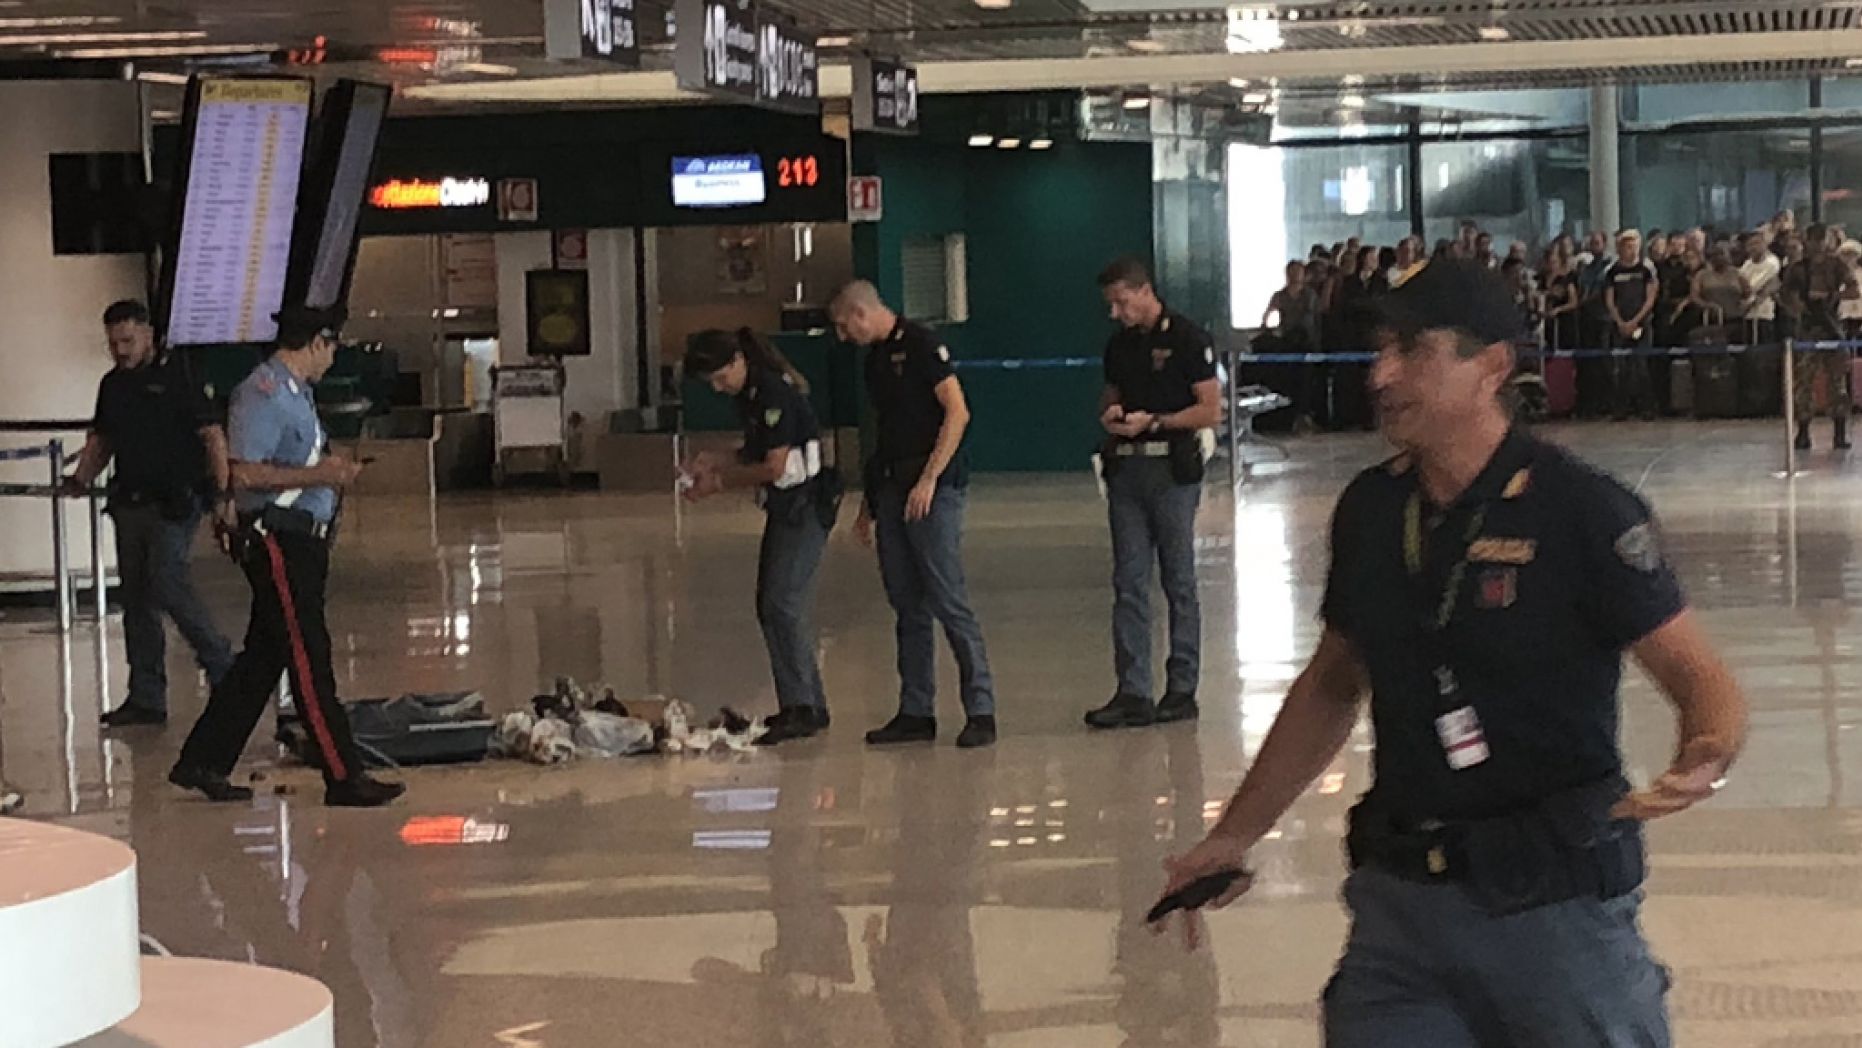 Italian police blew up a suitcase in the middle of a Rome airport